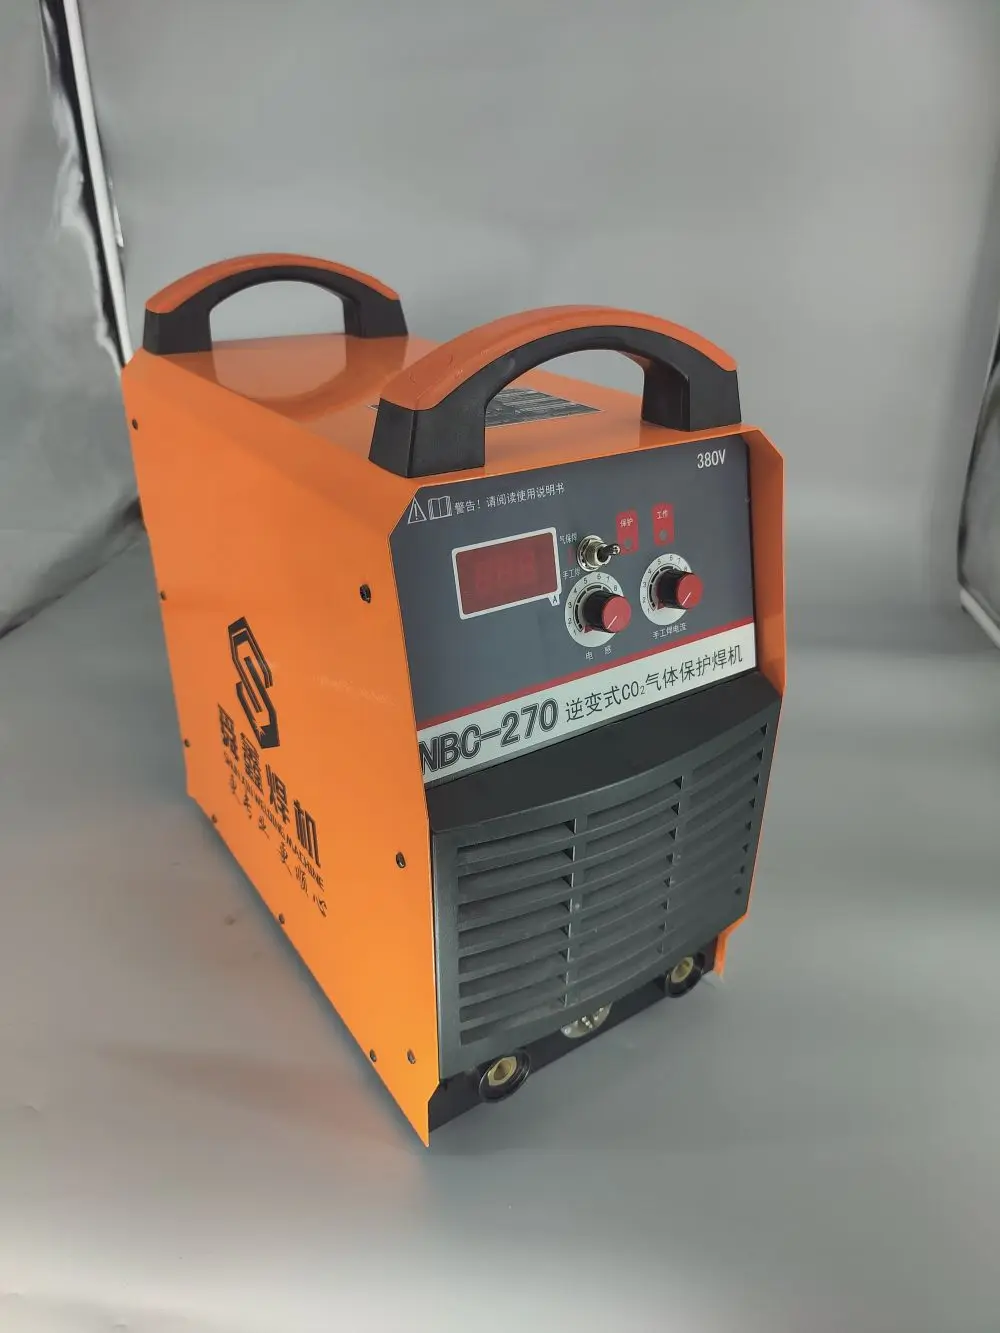 200/250/300/400 INVERTER WELDING MACHINE WITH HIGH DUTY CYCLE